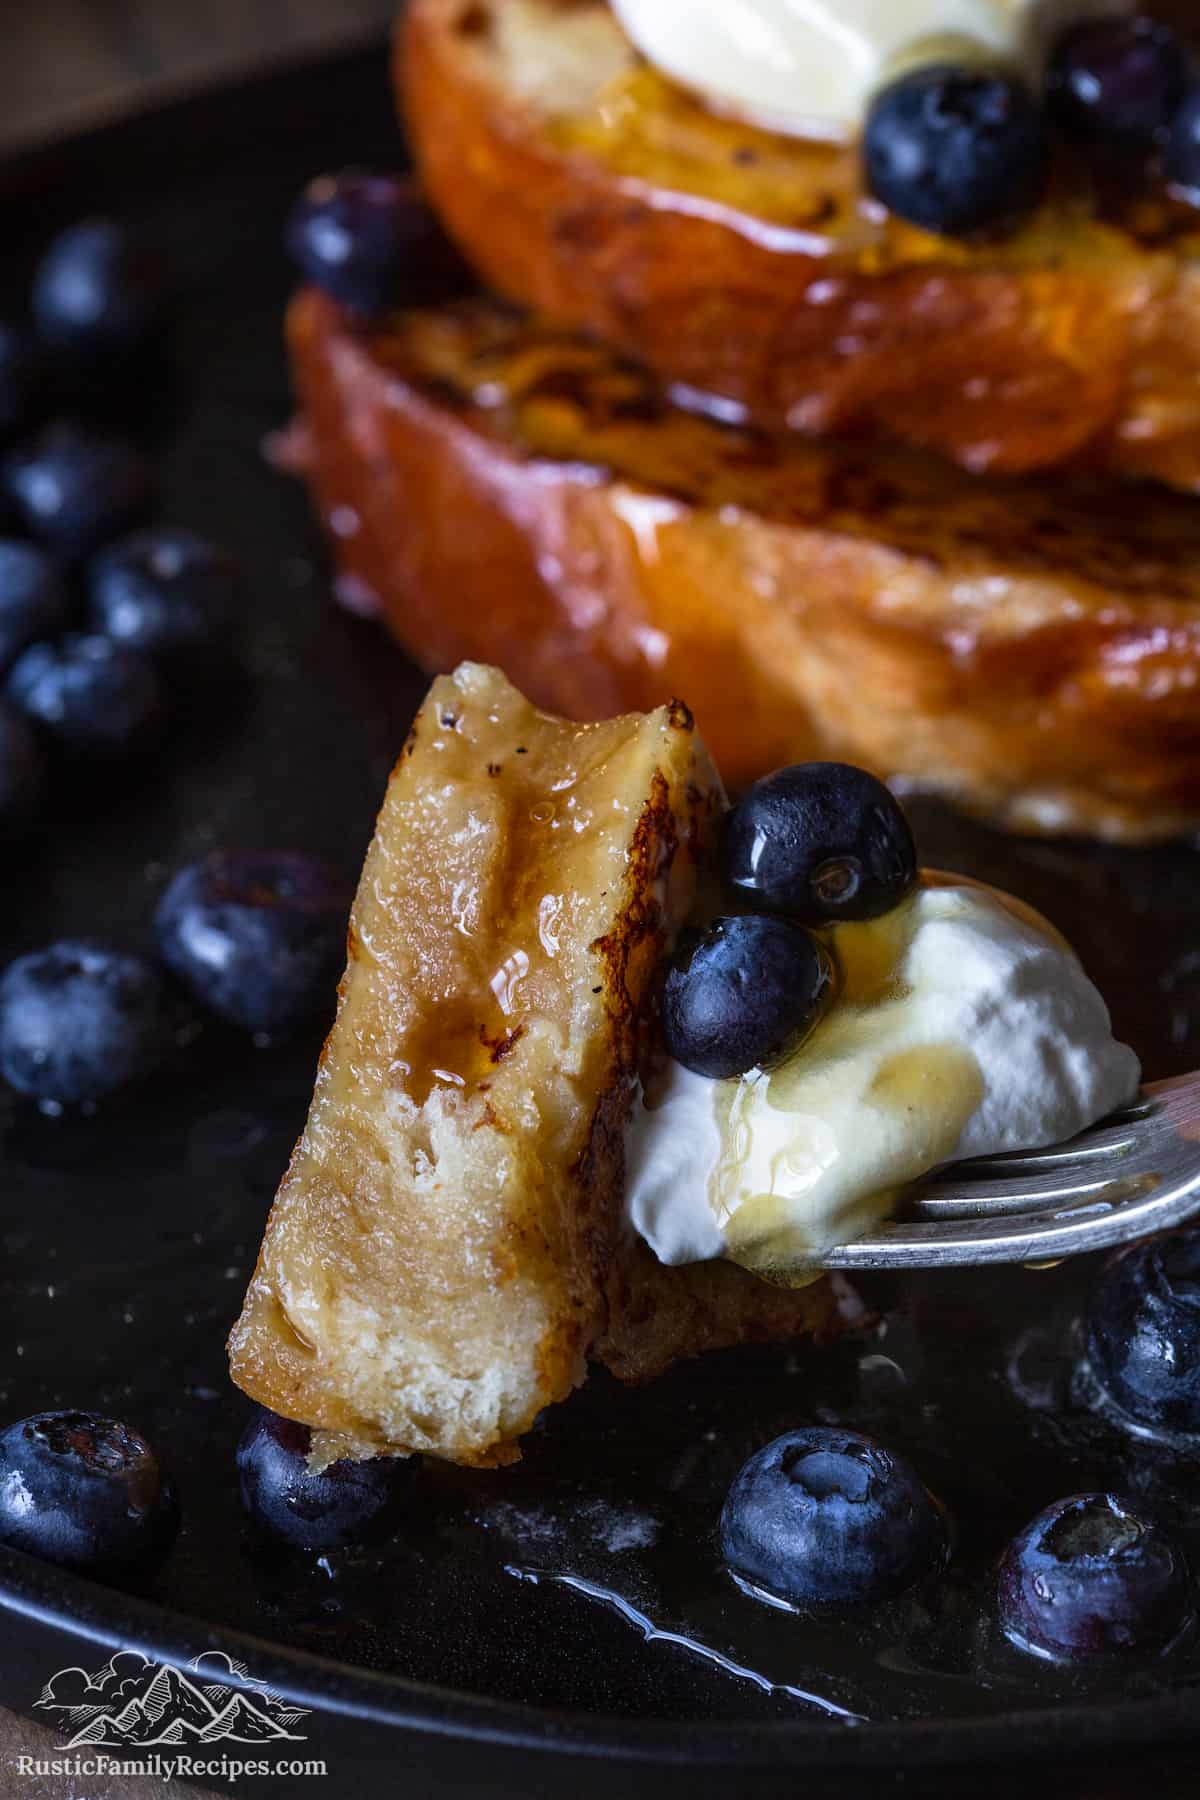 A fork with a bite full of french toast, whipped cream and blueberries